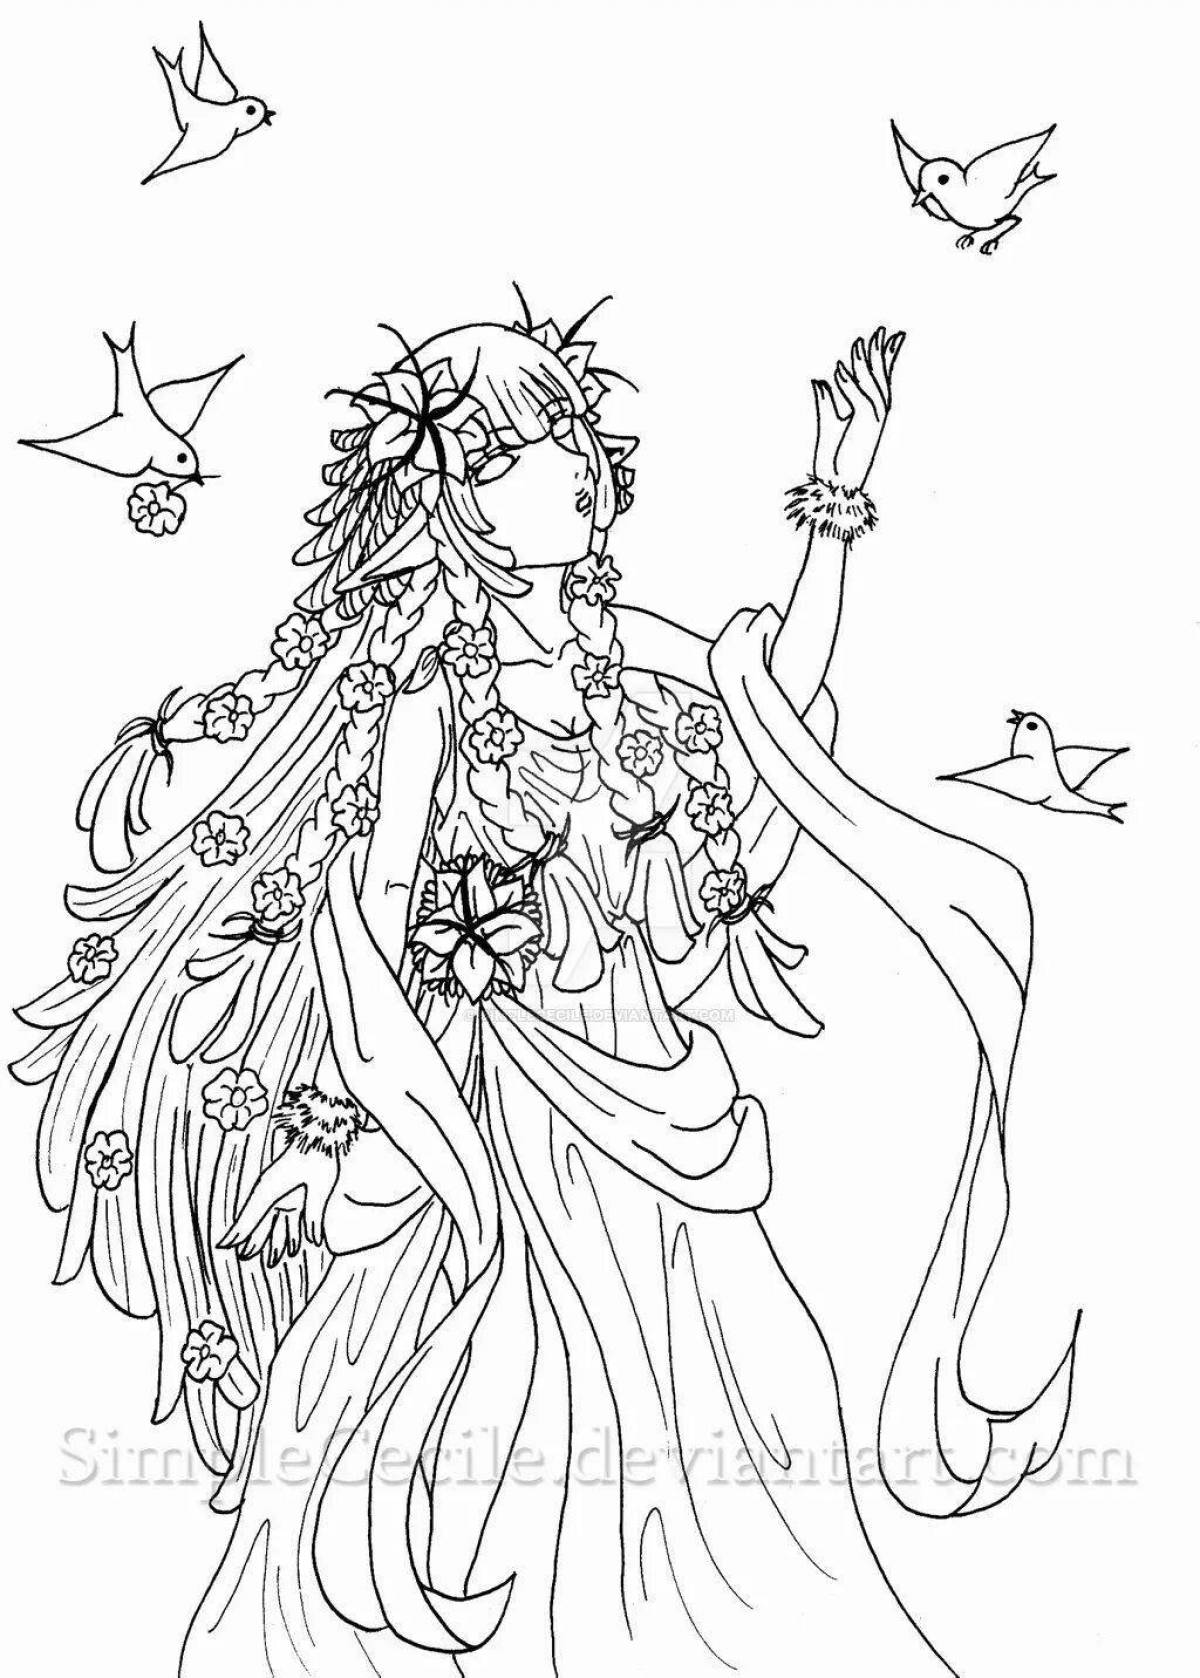 Exalted goddess aphrodite coloring page